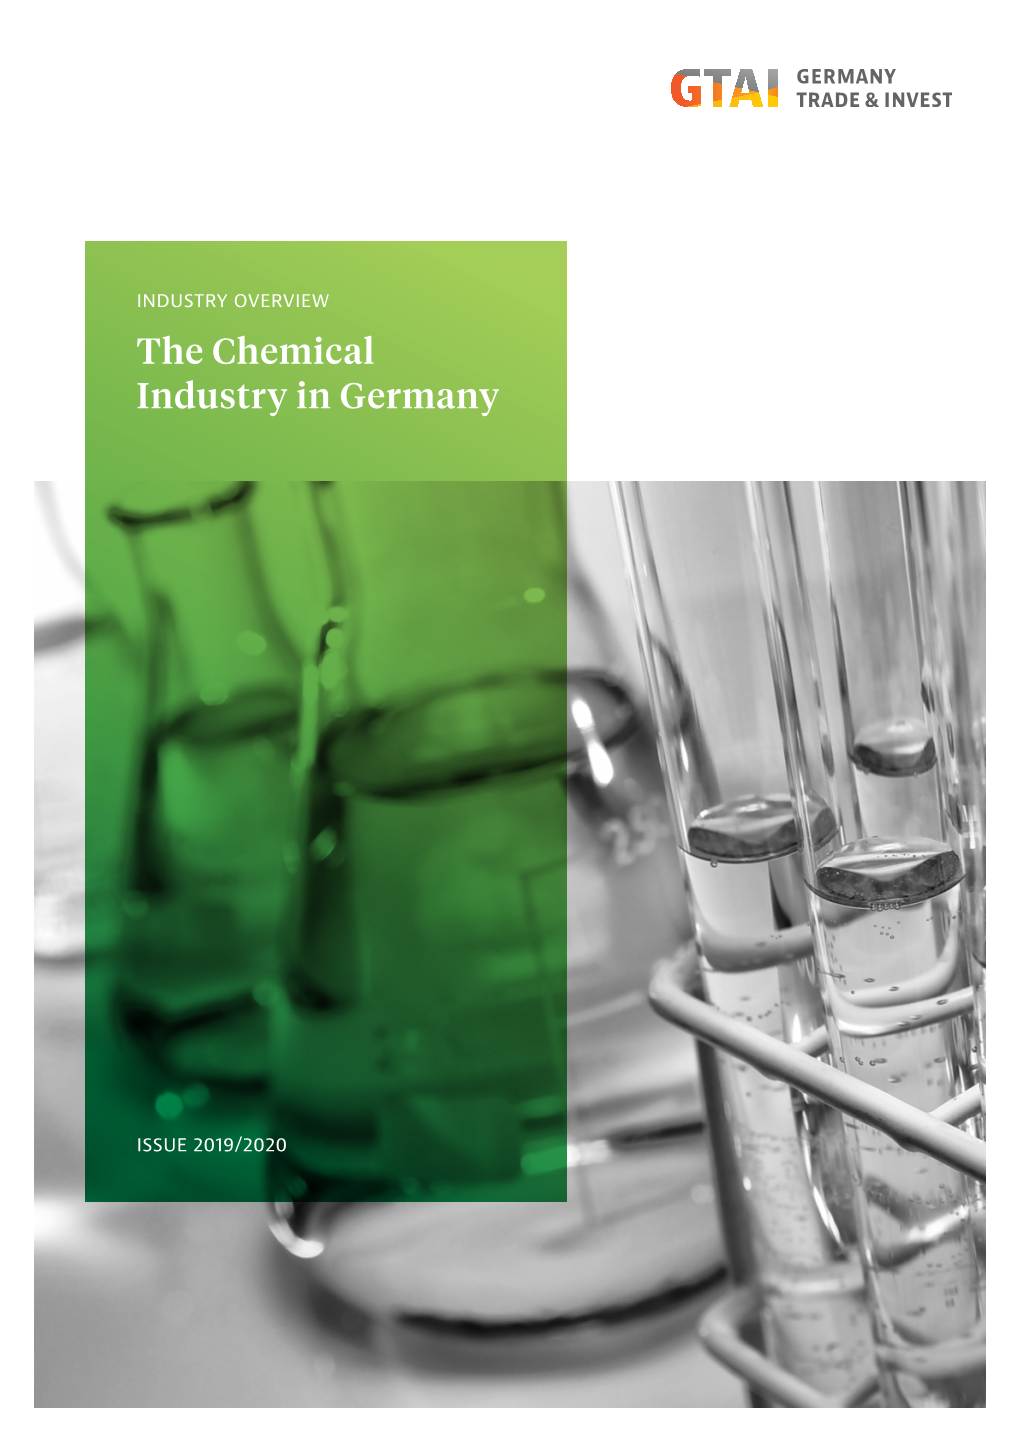 The Chemical Industry in Germany